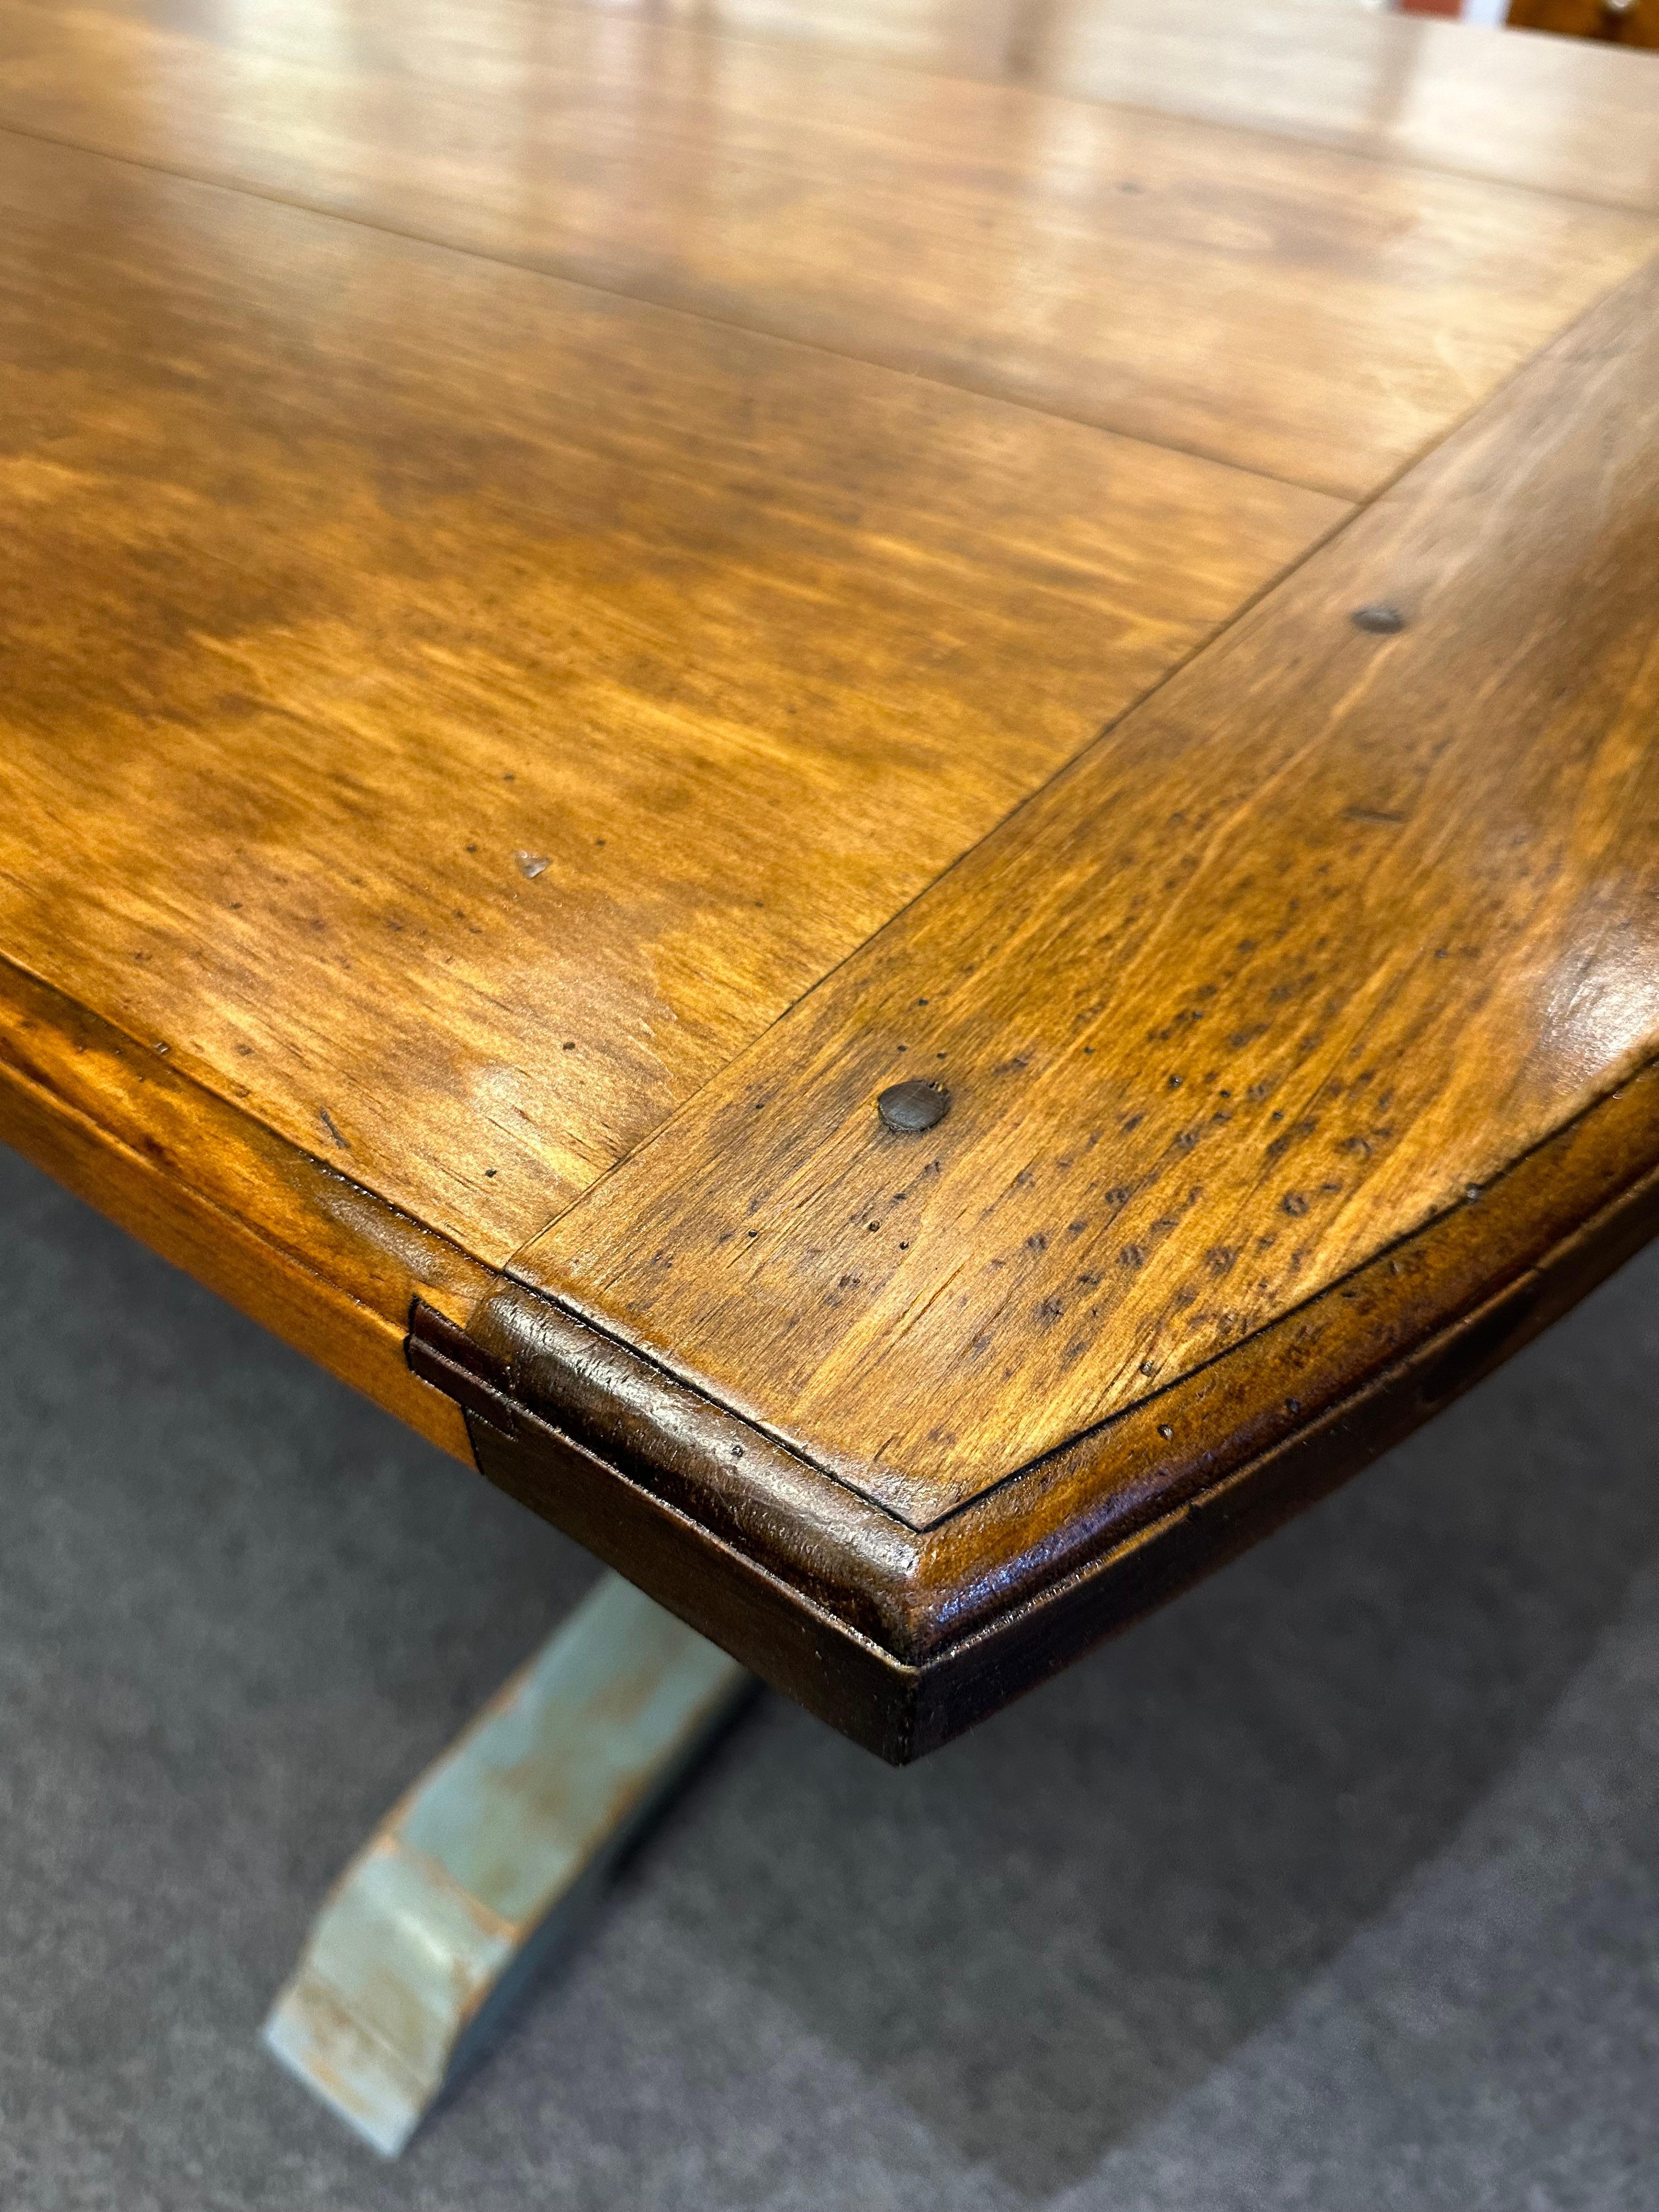 19th Century Scandinavian Trestle Table In Good Condition For Sale In Middleburg, VA